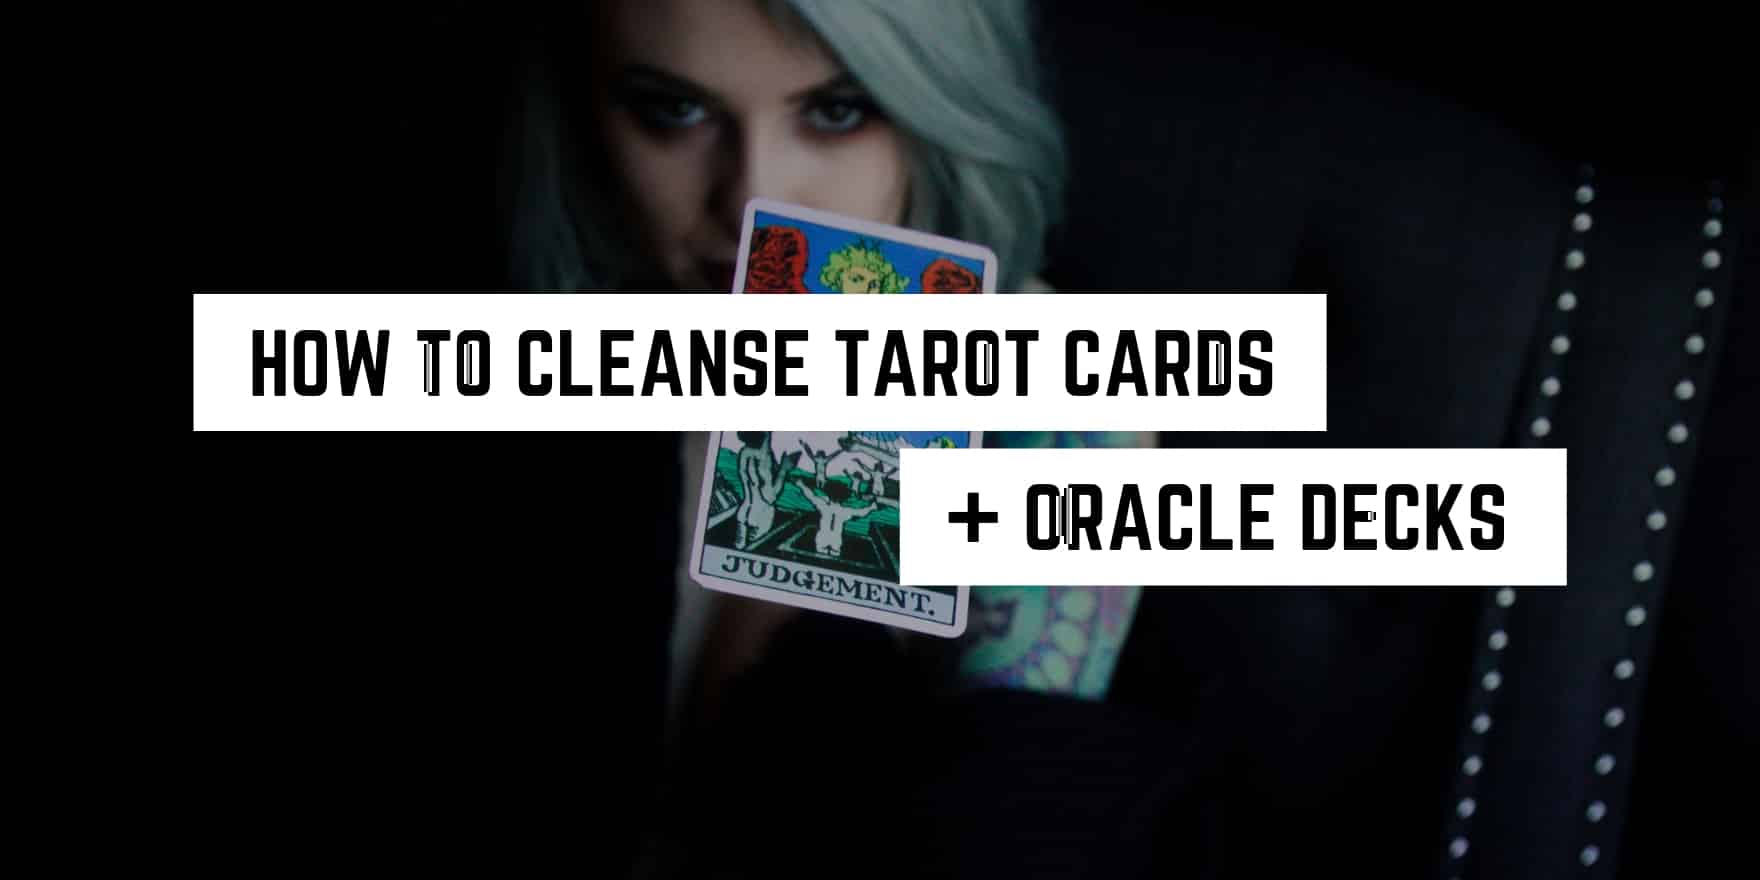 A mysterious figure holding tarot cards with text overlay 'how to cleanse tarot cards + oracle decks in a witchy manner'.